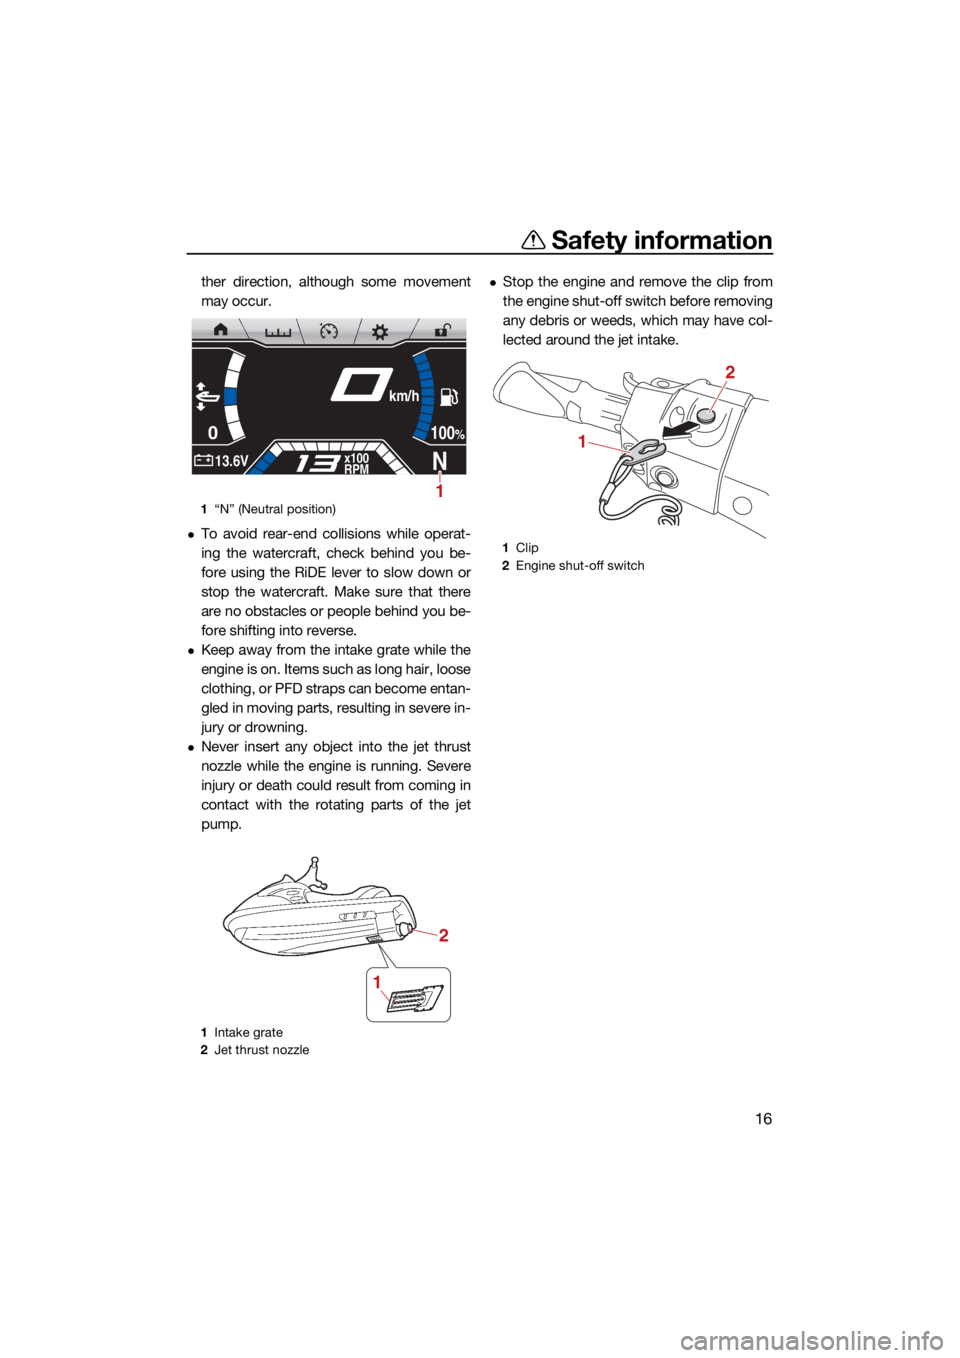 YAMAHA FX SVHO 2021 Owners Manual Safety information
16
ther direction, although some movement
may occur.
To avoid rear-end collisions while operat-
ing the watercraft, check behind you be-
fore using the RiDE lever to slow down or